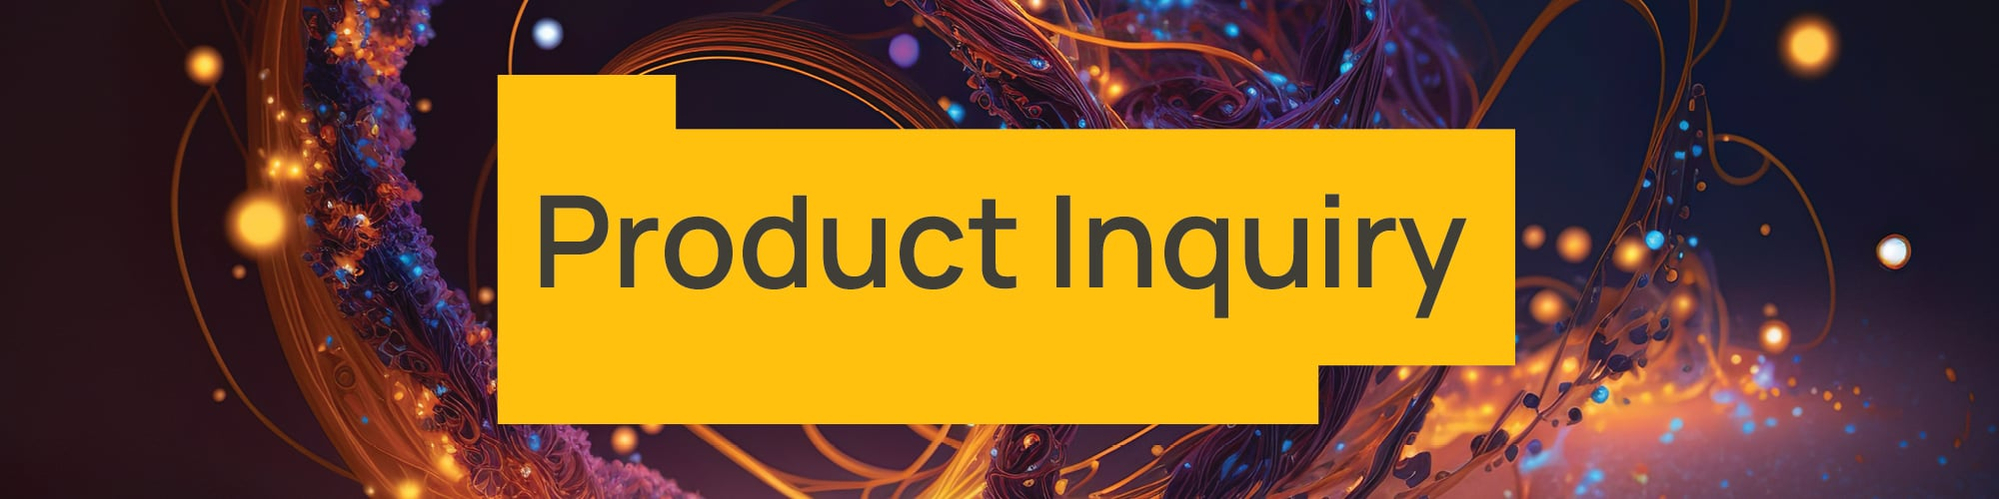 Product-Inquiry-Banner-1